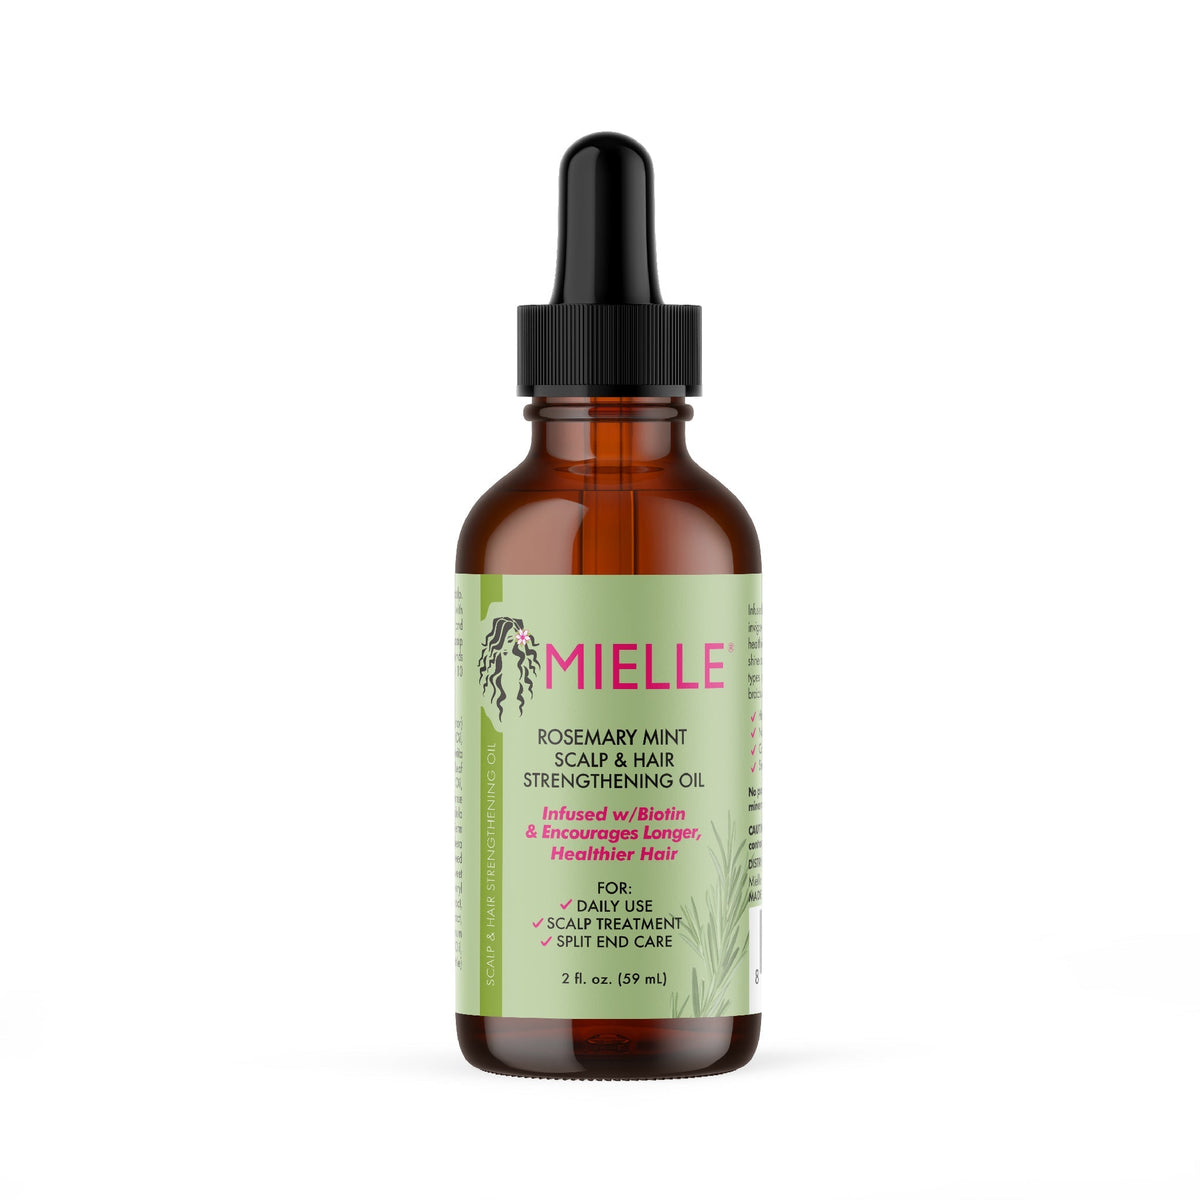 HUILE CAPILLAIRE ROSEMARY MINT OIL MIELLE - Premium  from DION - Just DA 4500! Shop now at DION